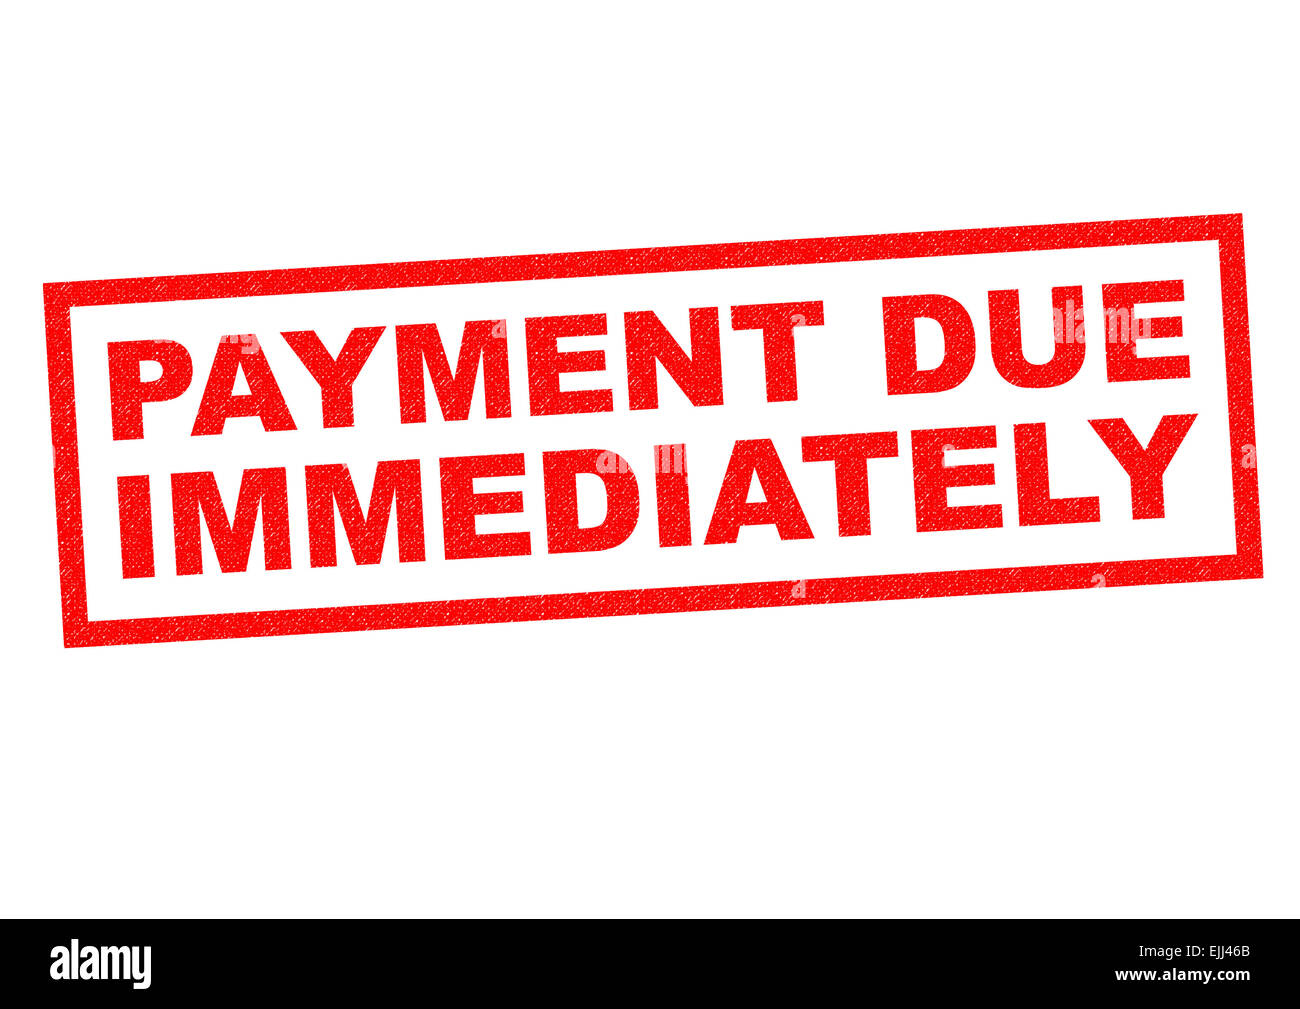 PAYMENT DUE IMMEDIATELY red Rubber Stamp over a white background. Stock Photo